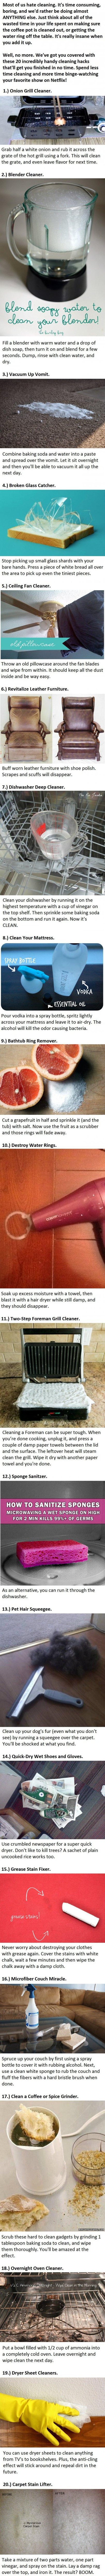 How Did I Clean Before Learning These 20 Hacks? #10 Alone Is Genius! -   Misc